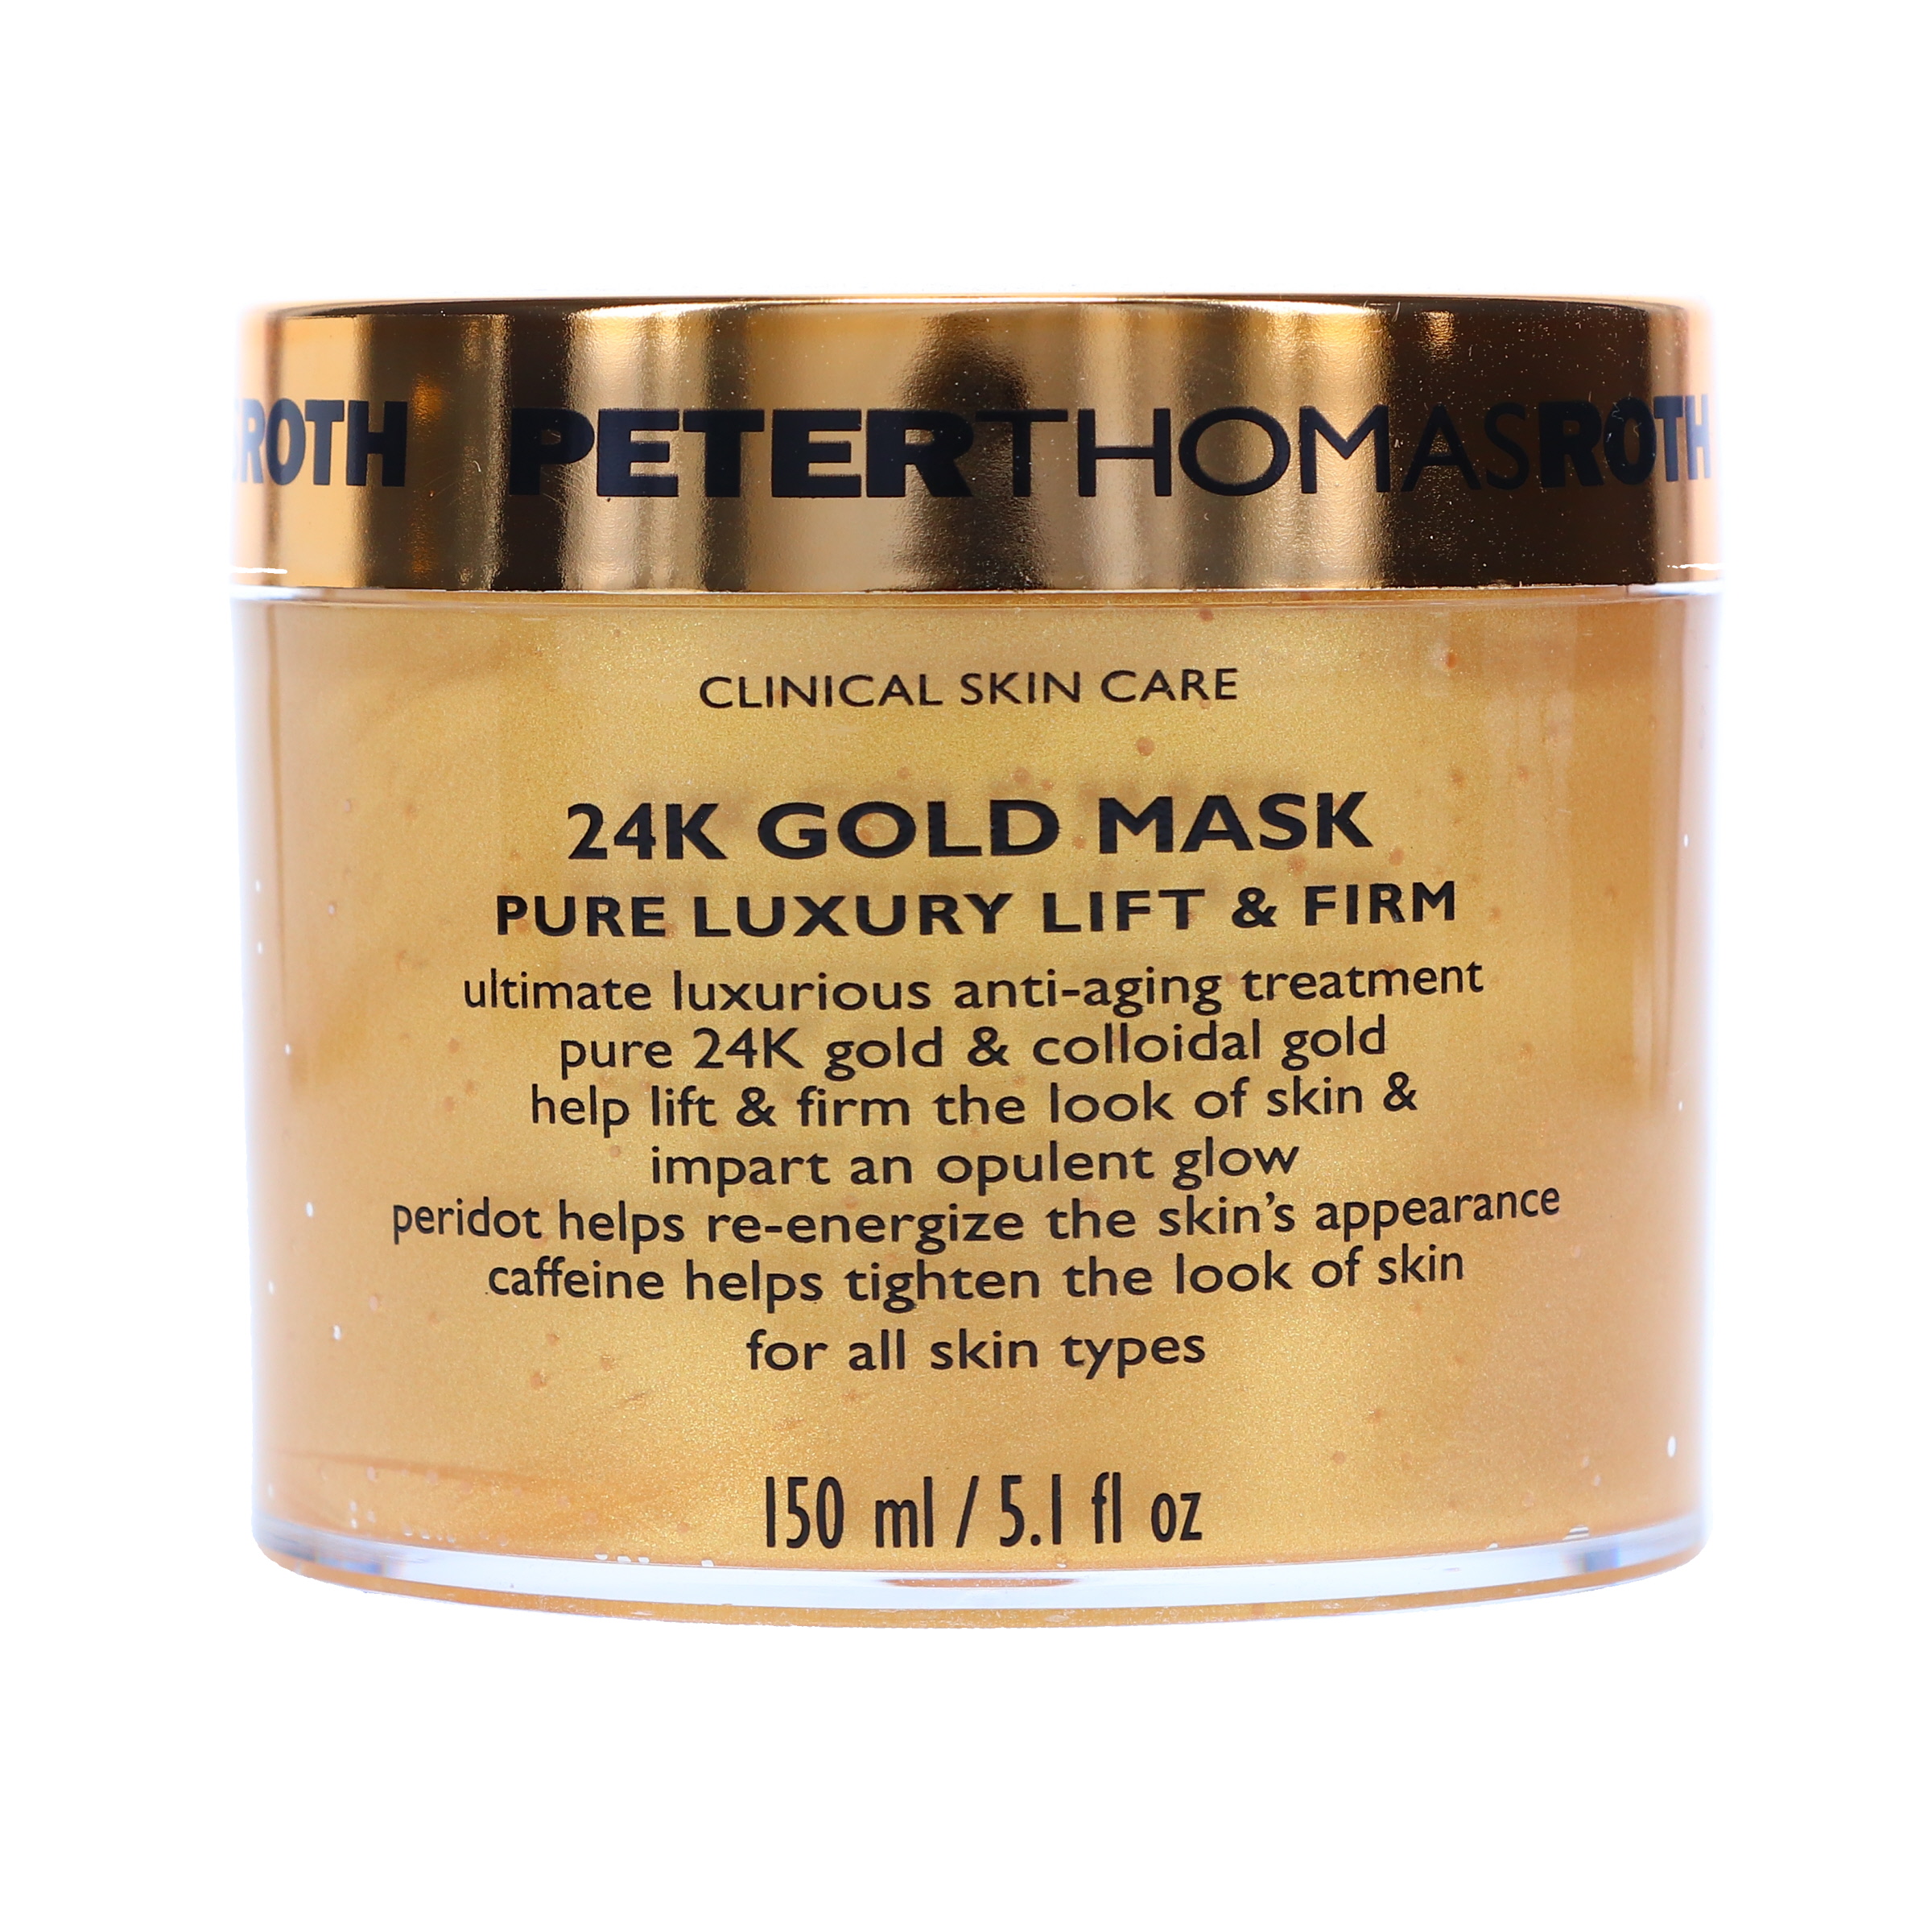 Peter Thomas Roth 24K Gold Mask Pure Luxury Lift & Firm Mask 5.1 oz - image 1 of 8